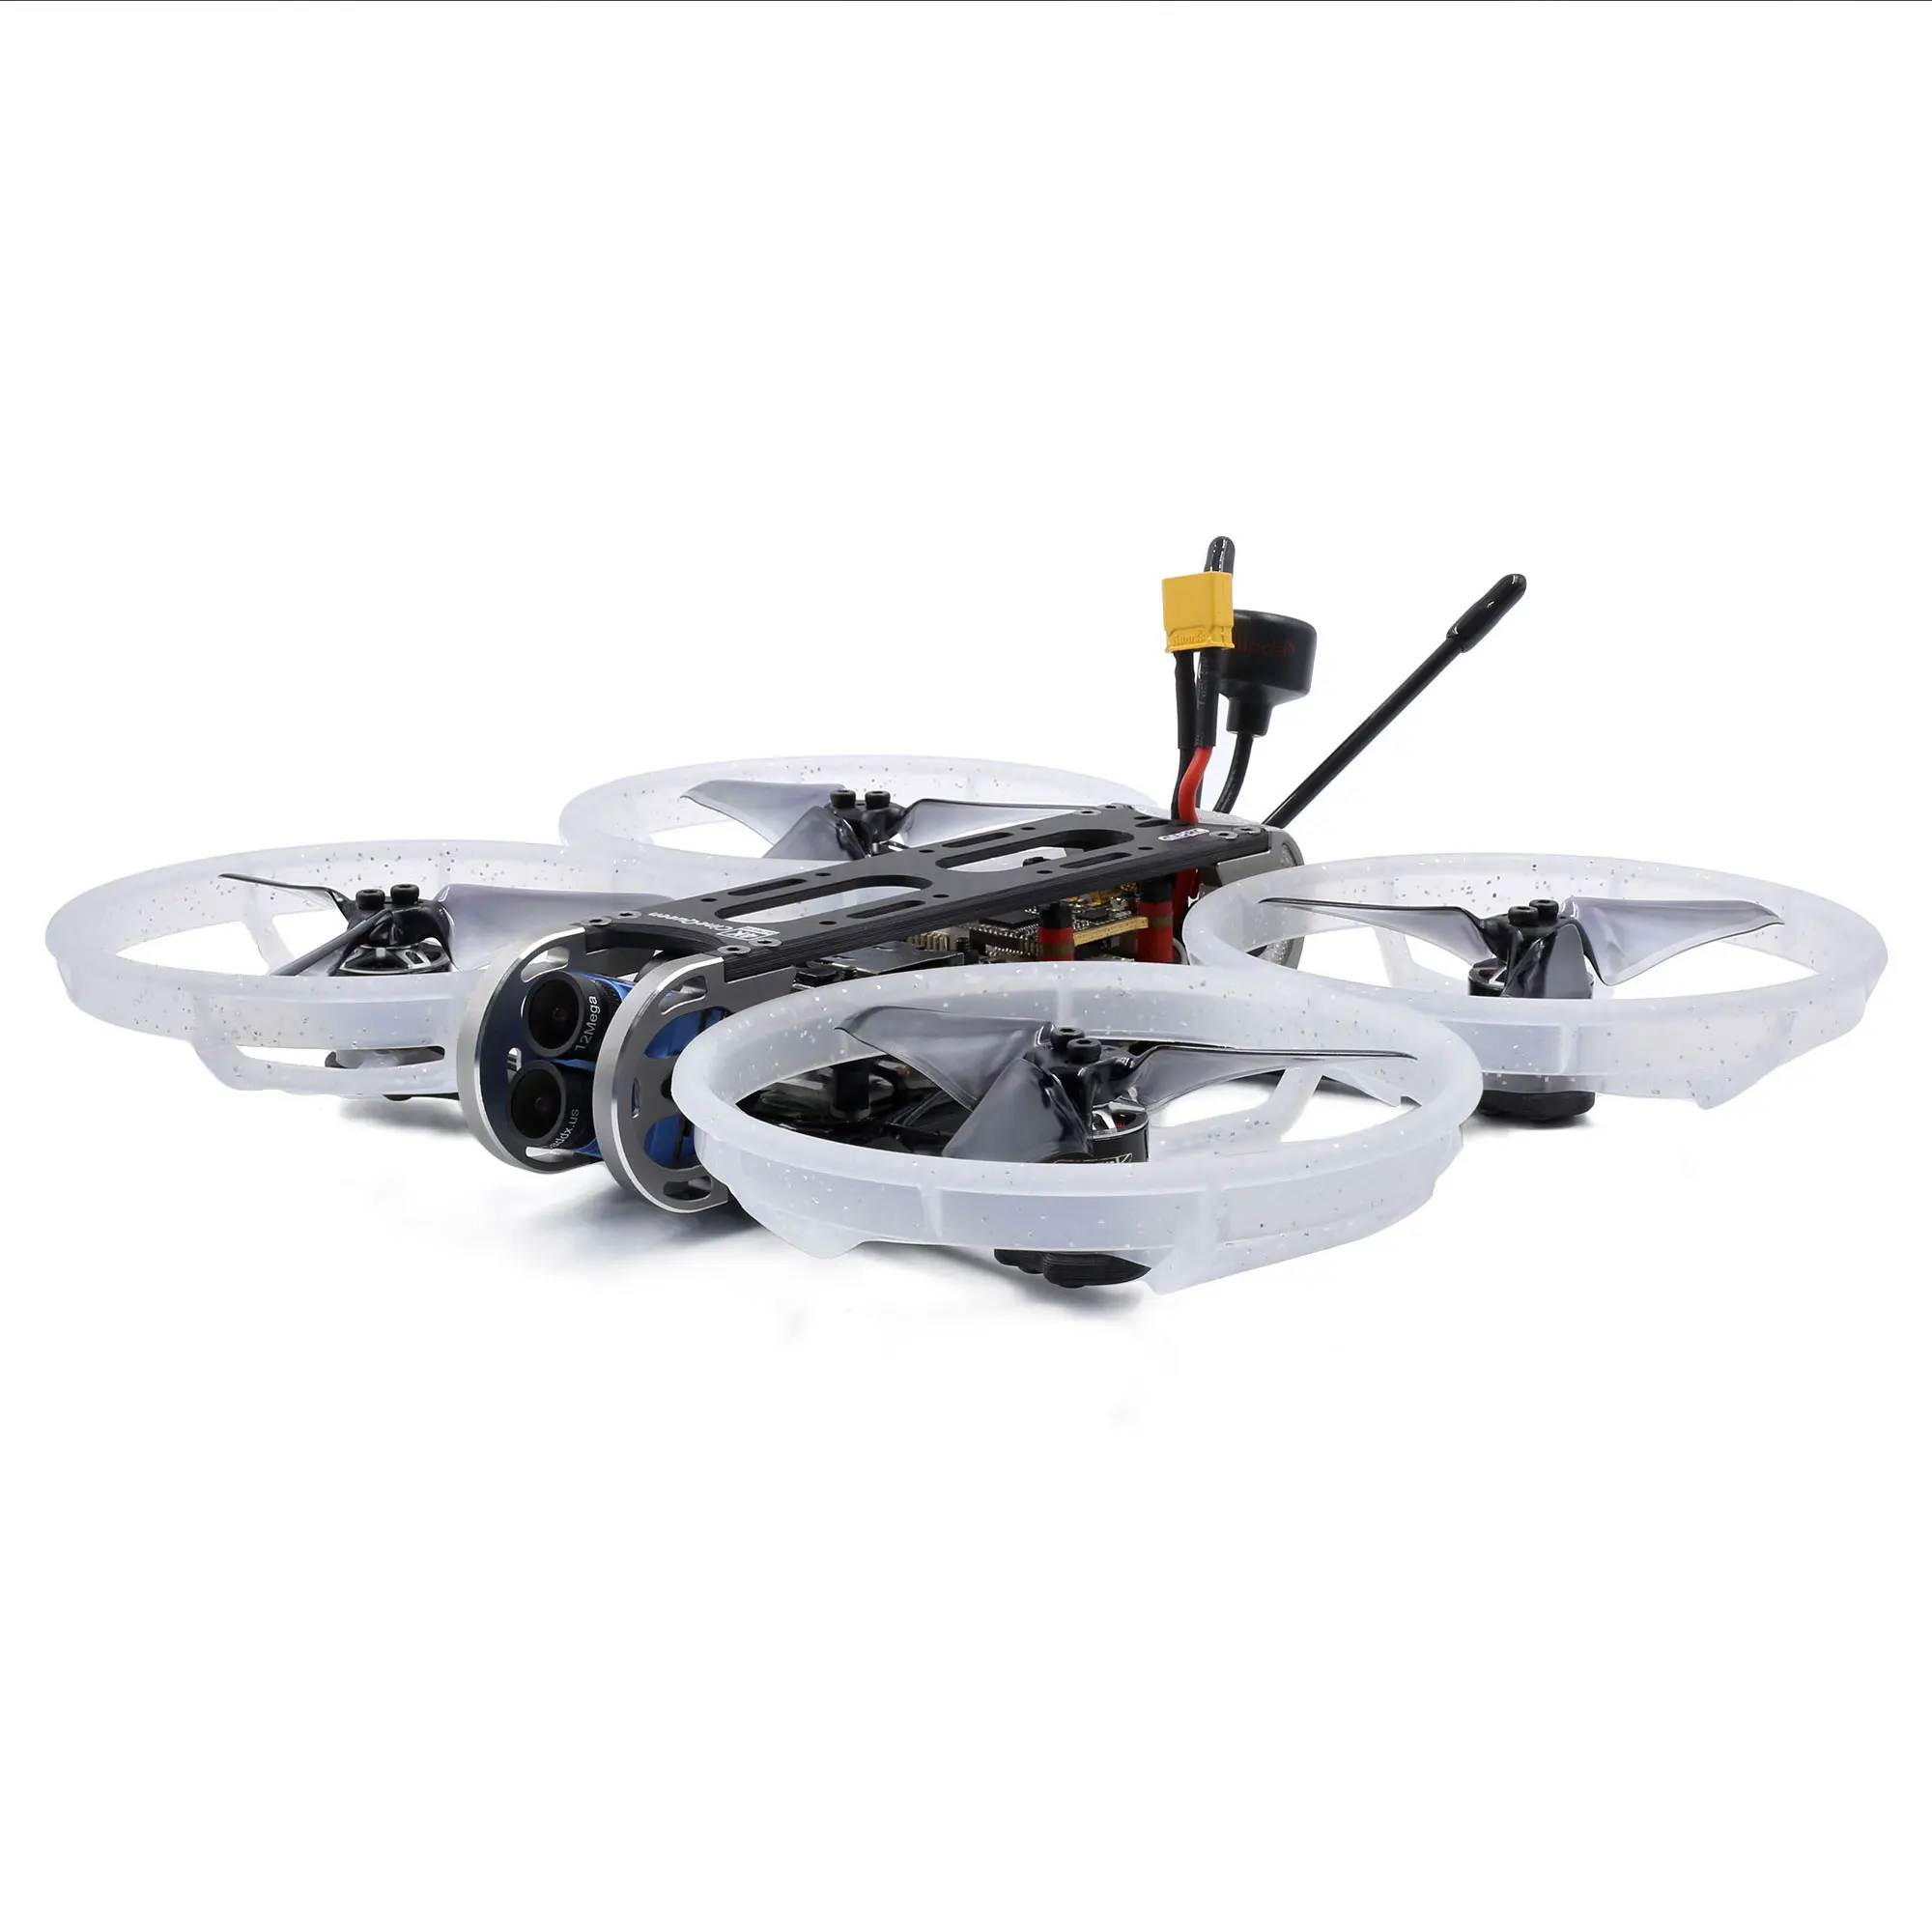 GEPRC CineQueen 145mm 3Inch Tarsier V2/Hybrid 4K HD Camera 4S RC Duct Drone Cinewhoop for FPV Racing Freestyle PNP/BNF 4